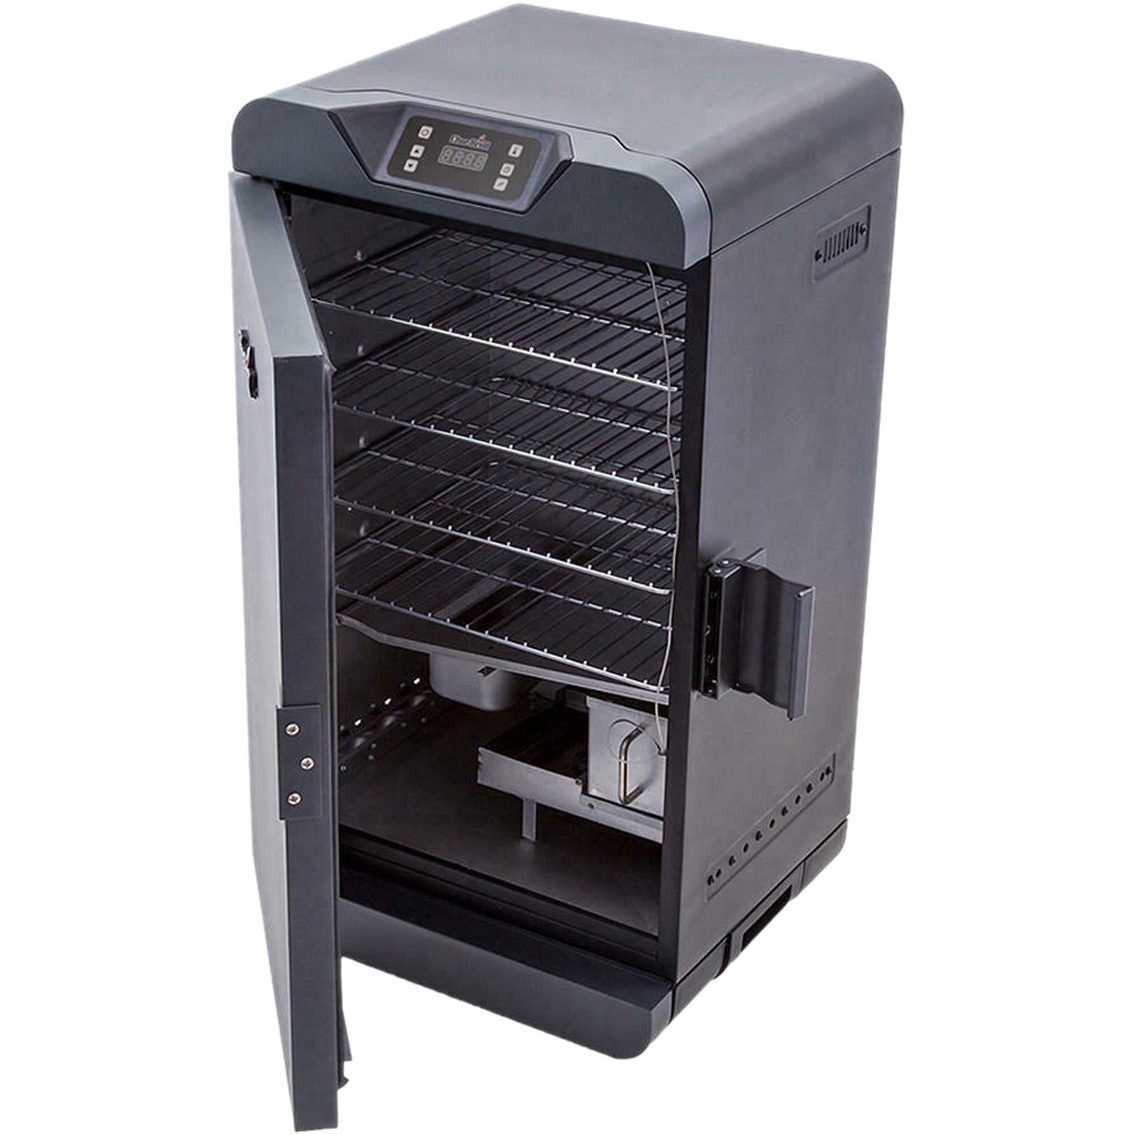 Char-Broil Digital Electric Smoker - Image 2 of 4